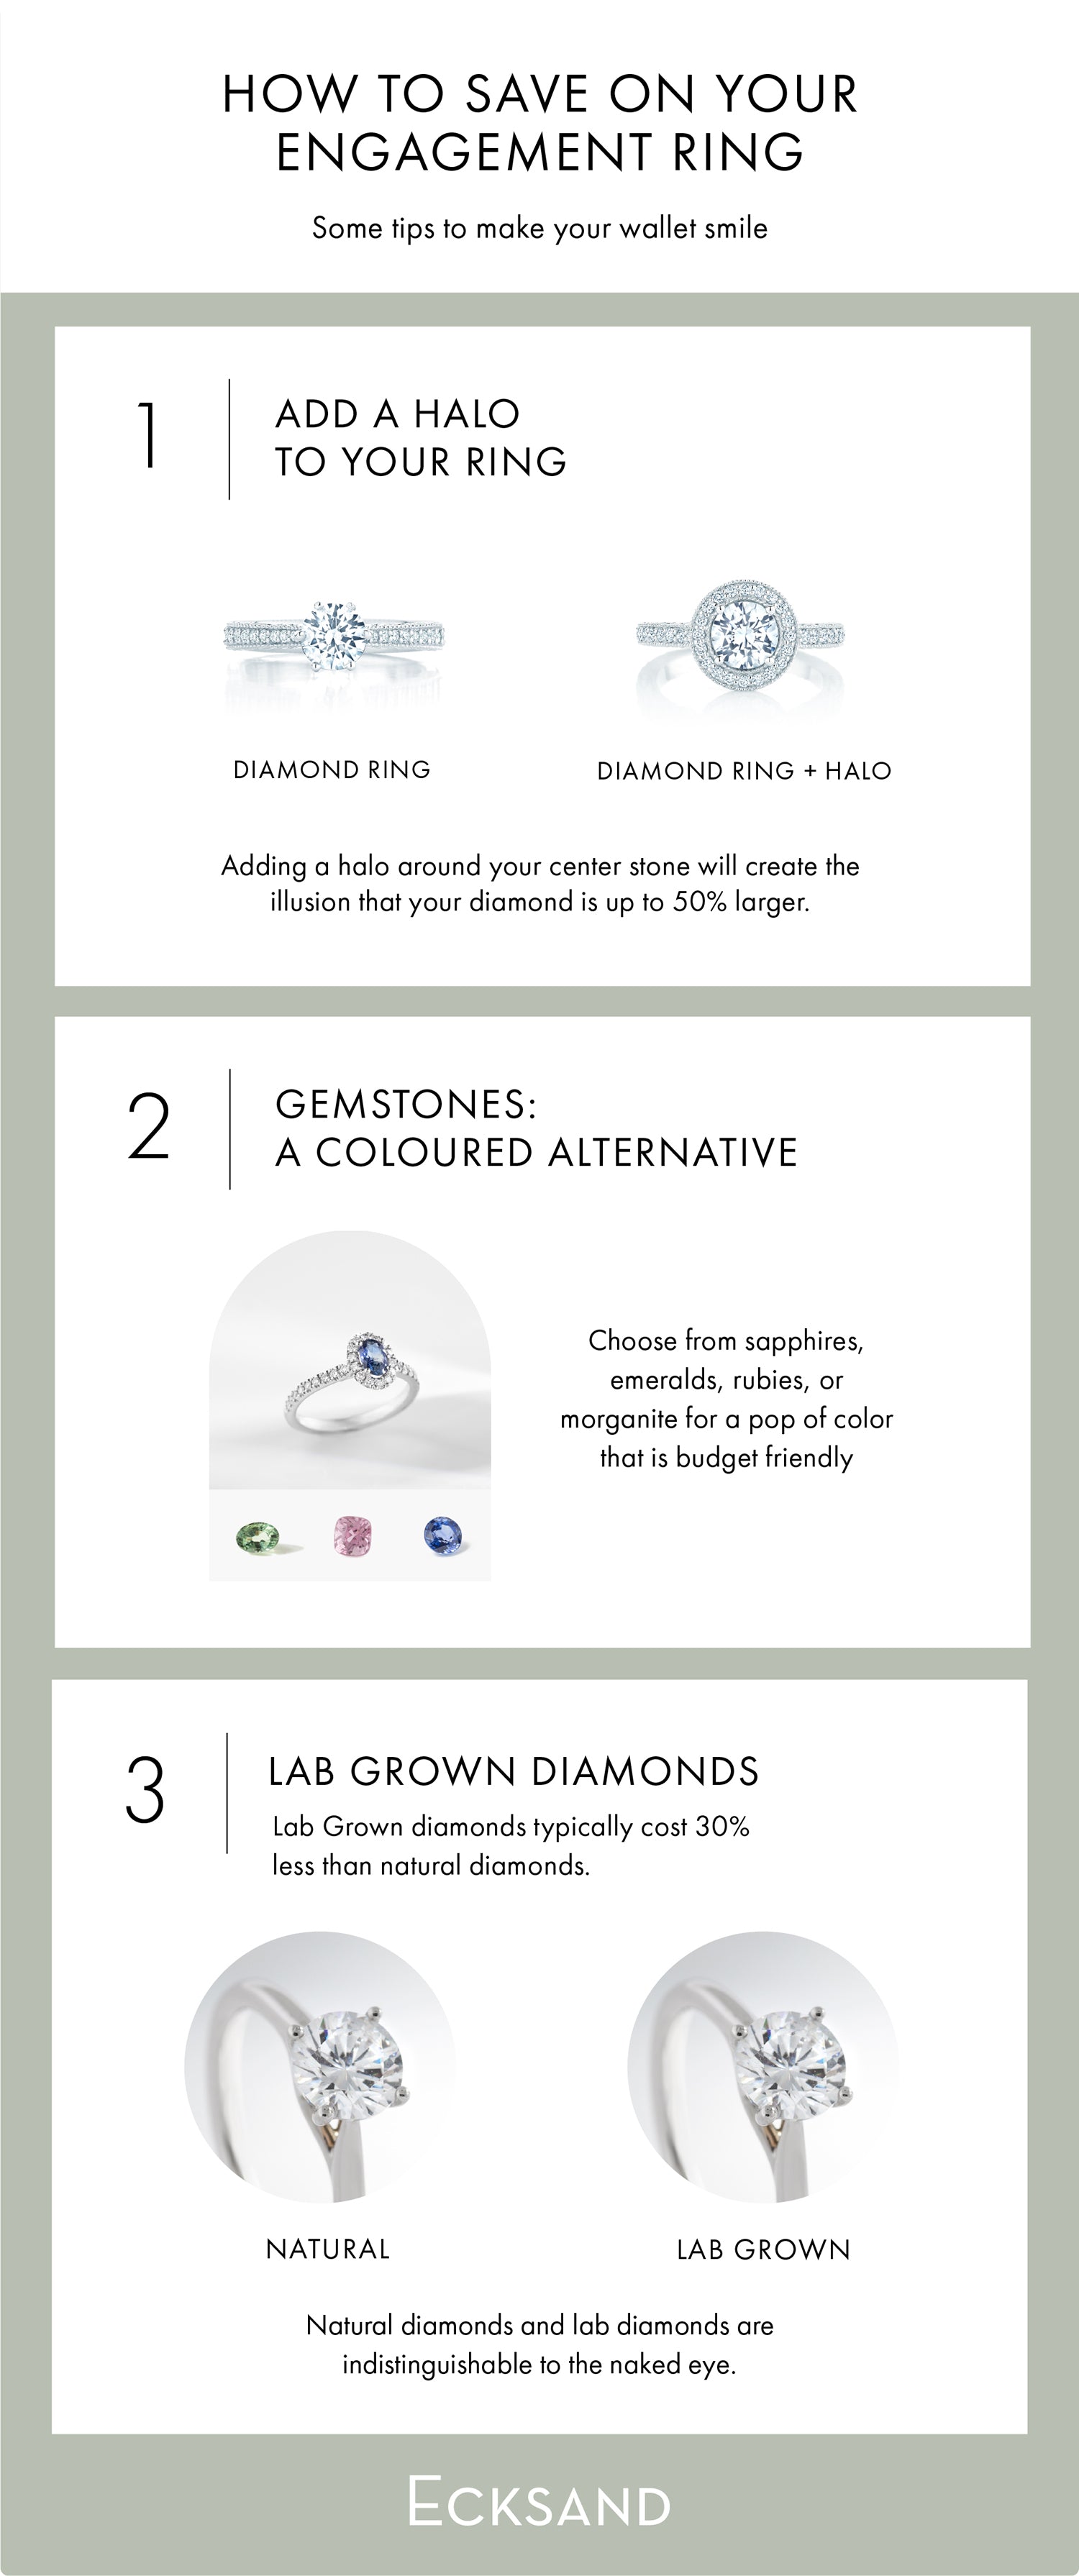 Image on how to save on your engagement ring